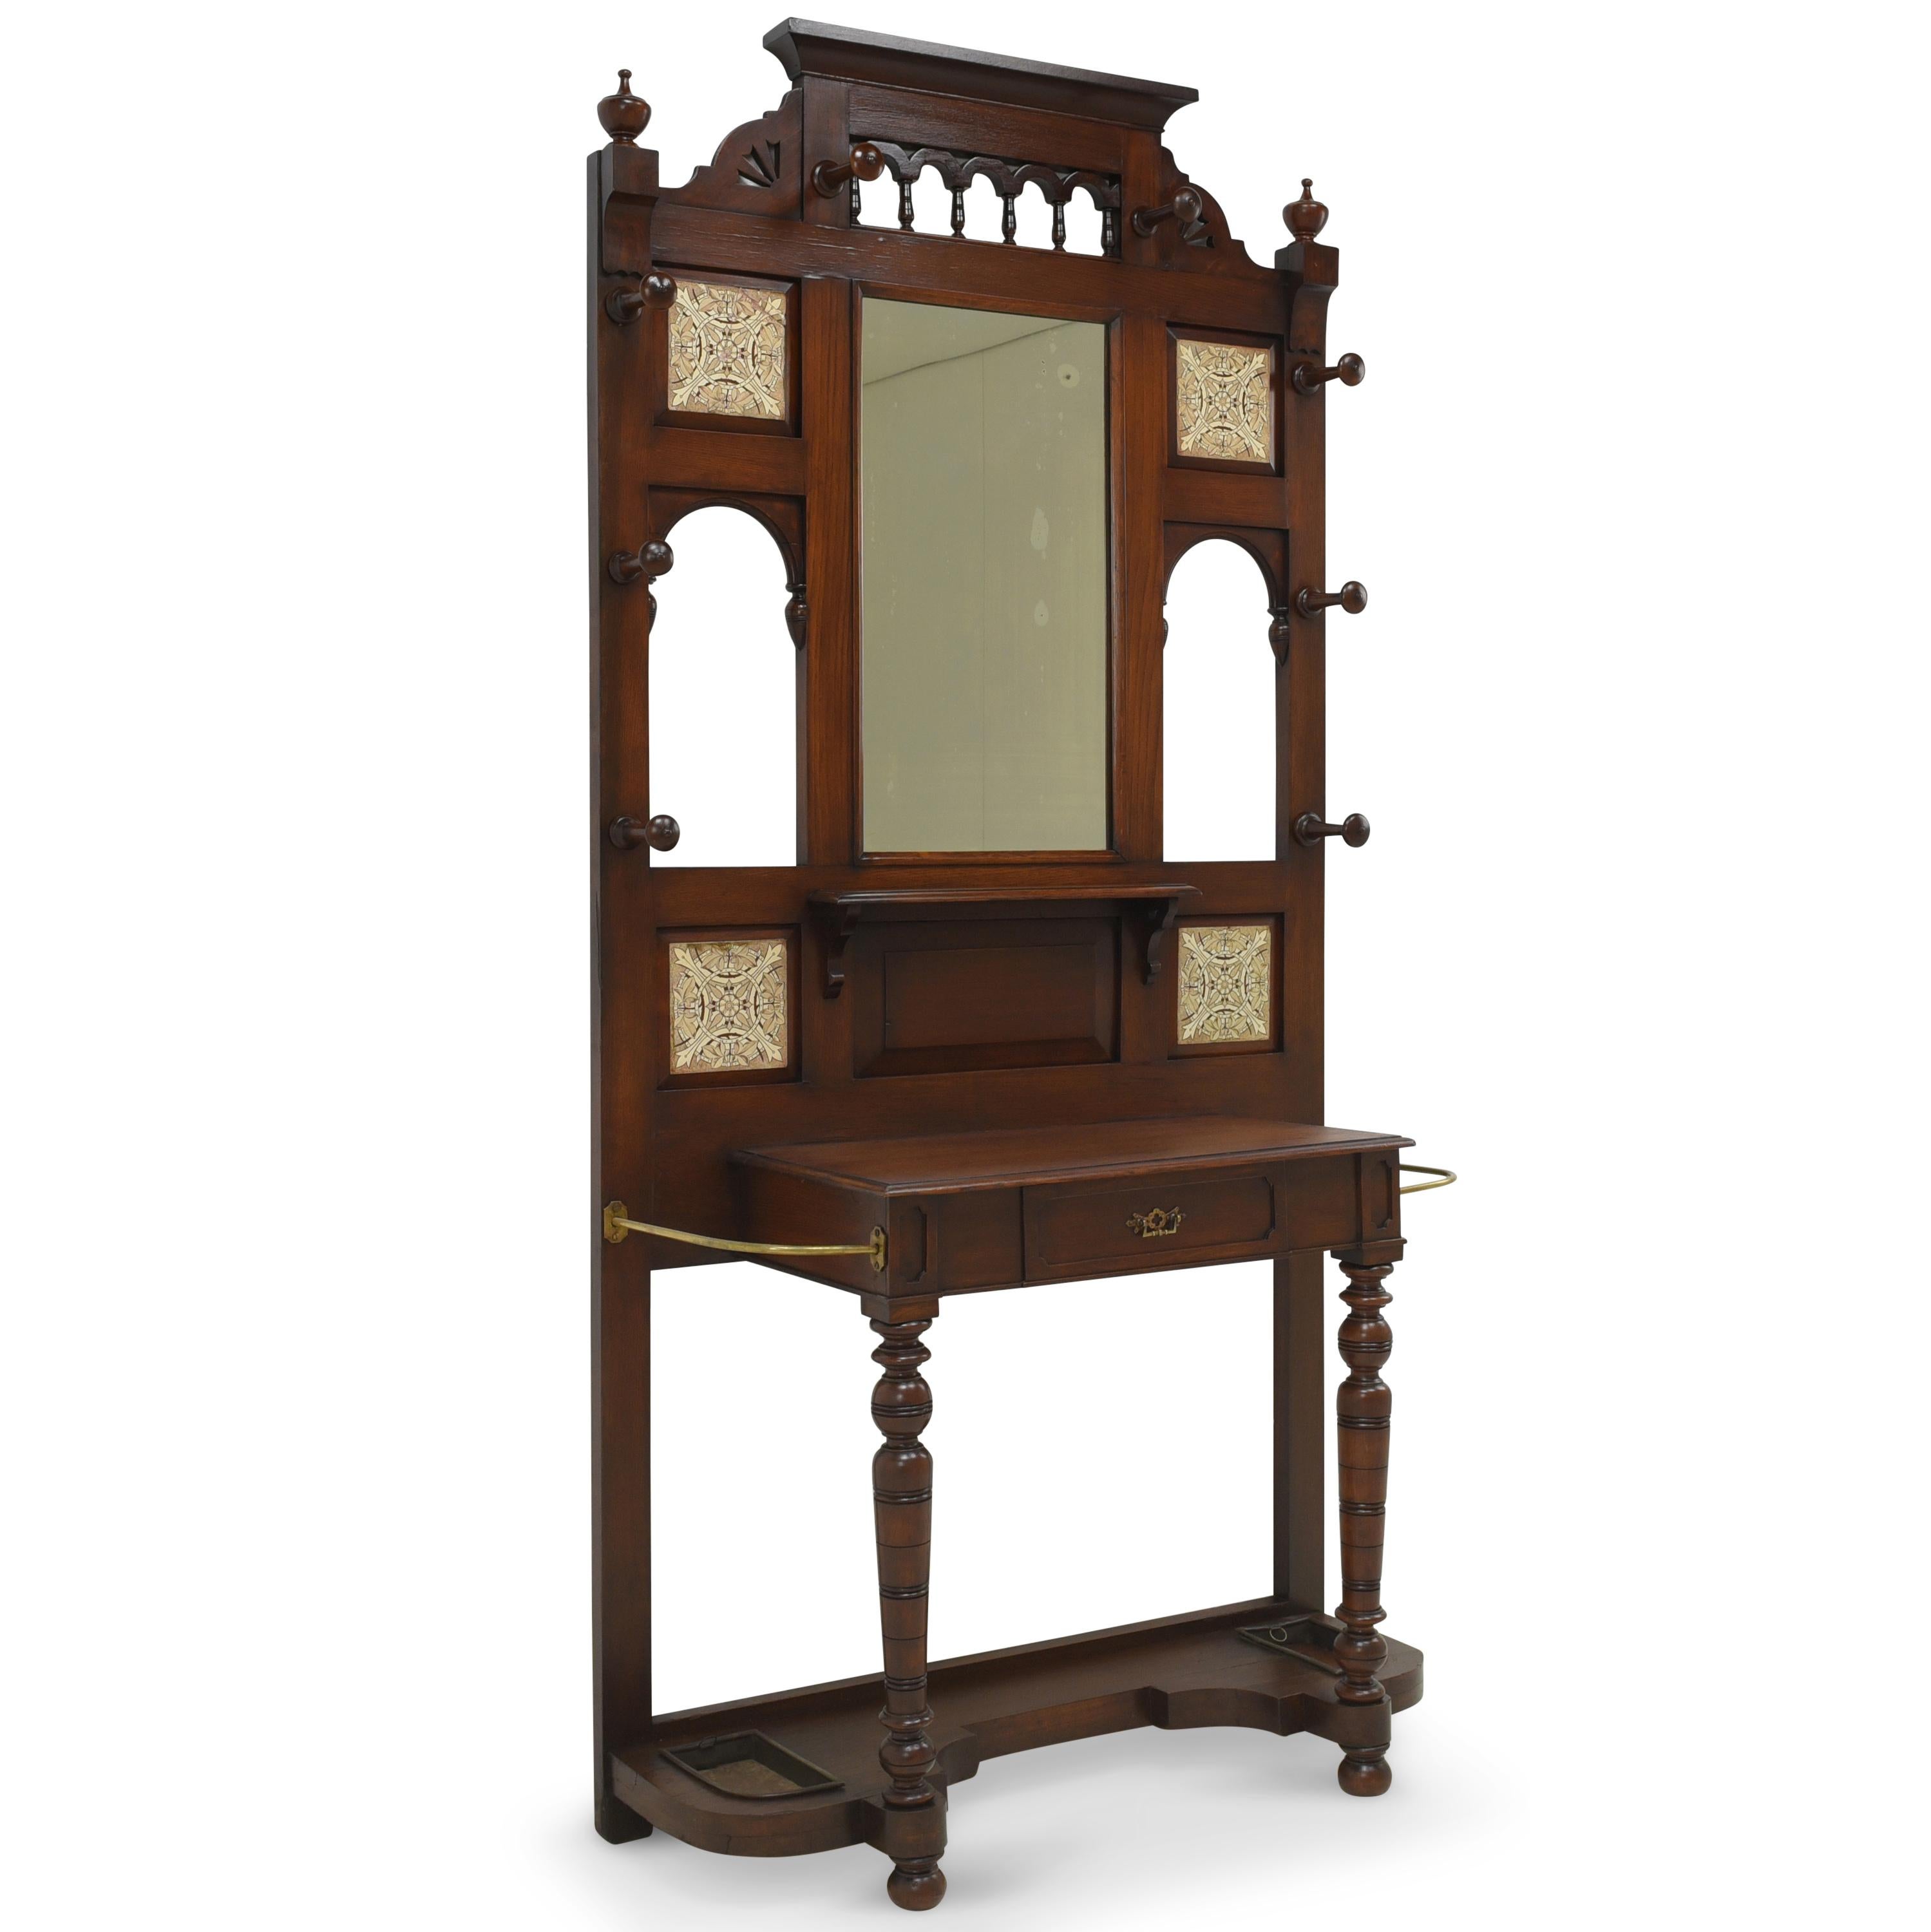 Wardrobe restored Wilhelminian period around 1900 solid oak England

Features:
Model with drawer compartment, umbrella stand, mirror and wooden hook
Originally from England
Beautiful shape
Four ornamental tiles, one damaged
Beautiful